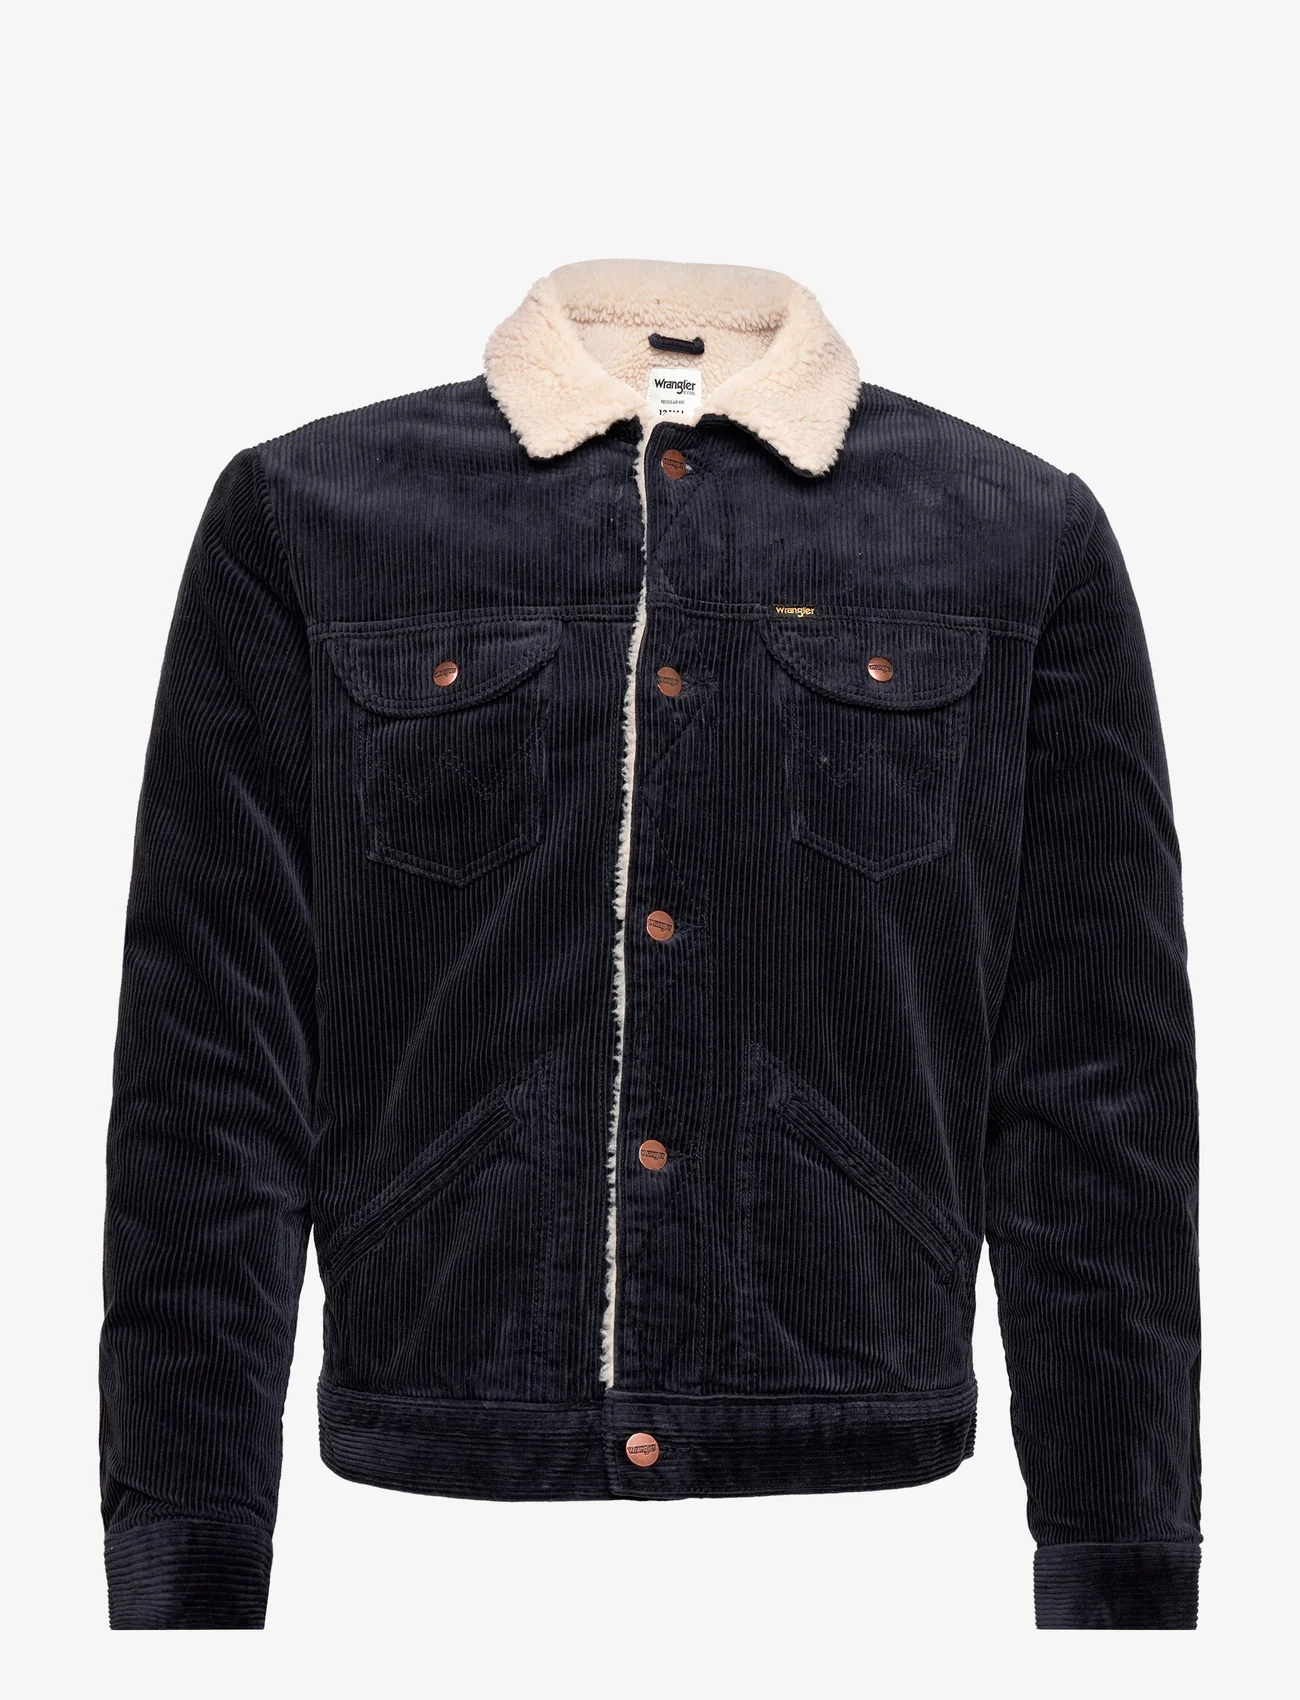 Wrangler 124mj Sherpa  €. Buy Denim Jackets from Wrangler online at  . Fast delivery and easy returns